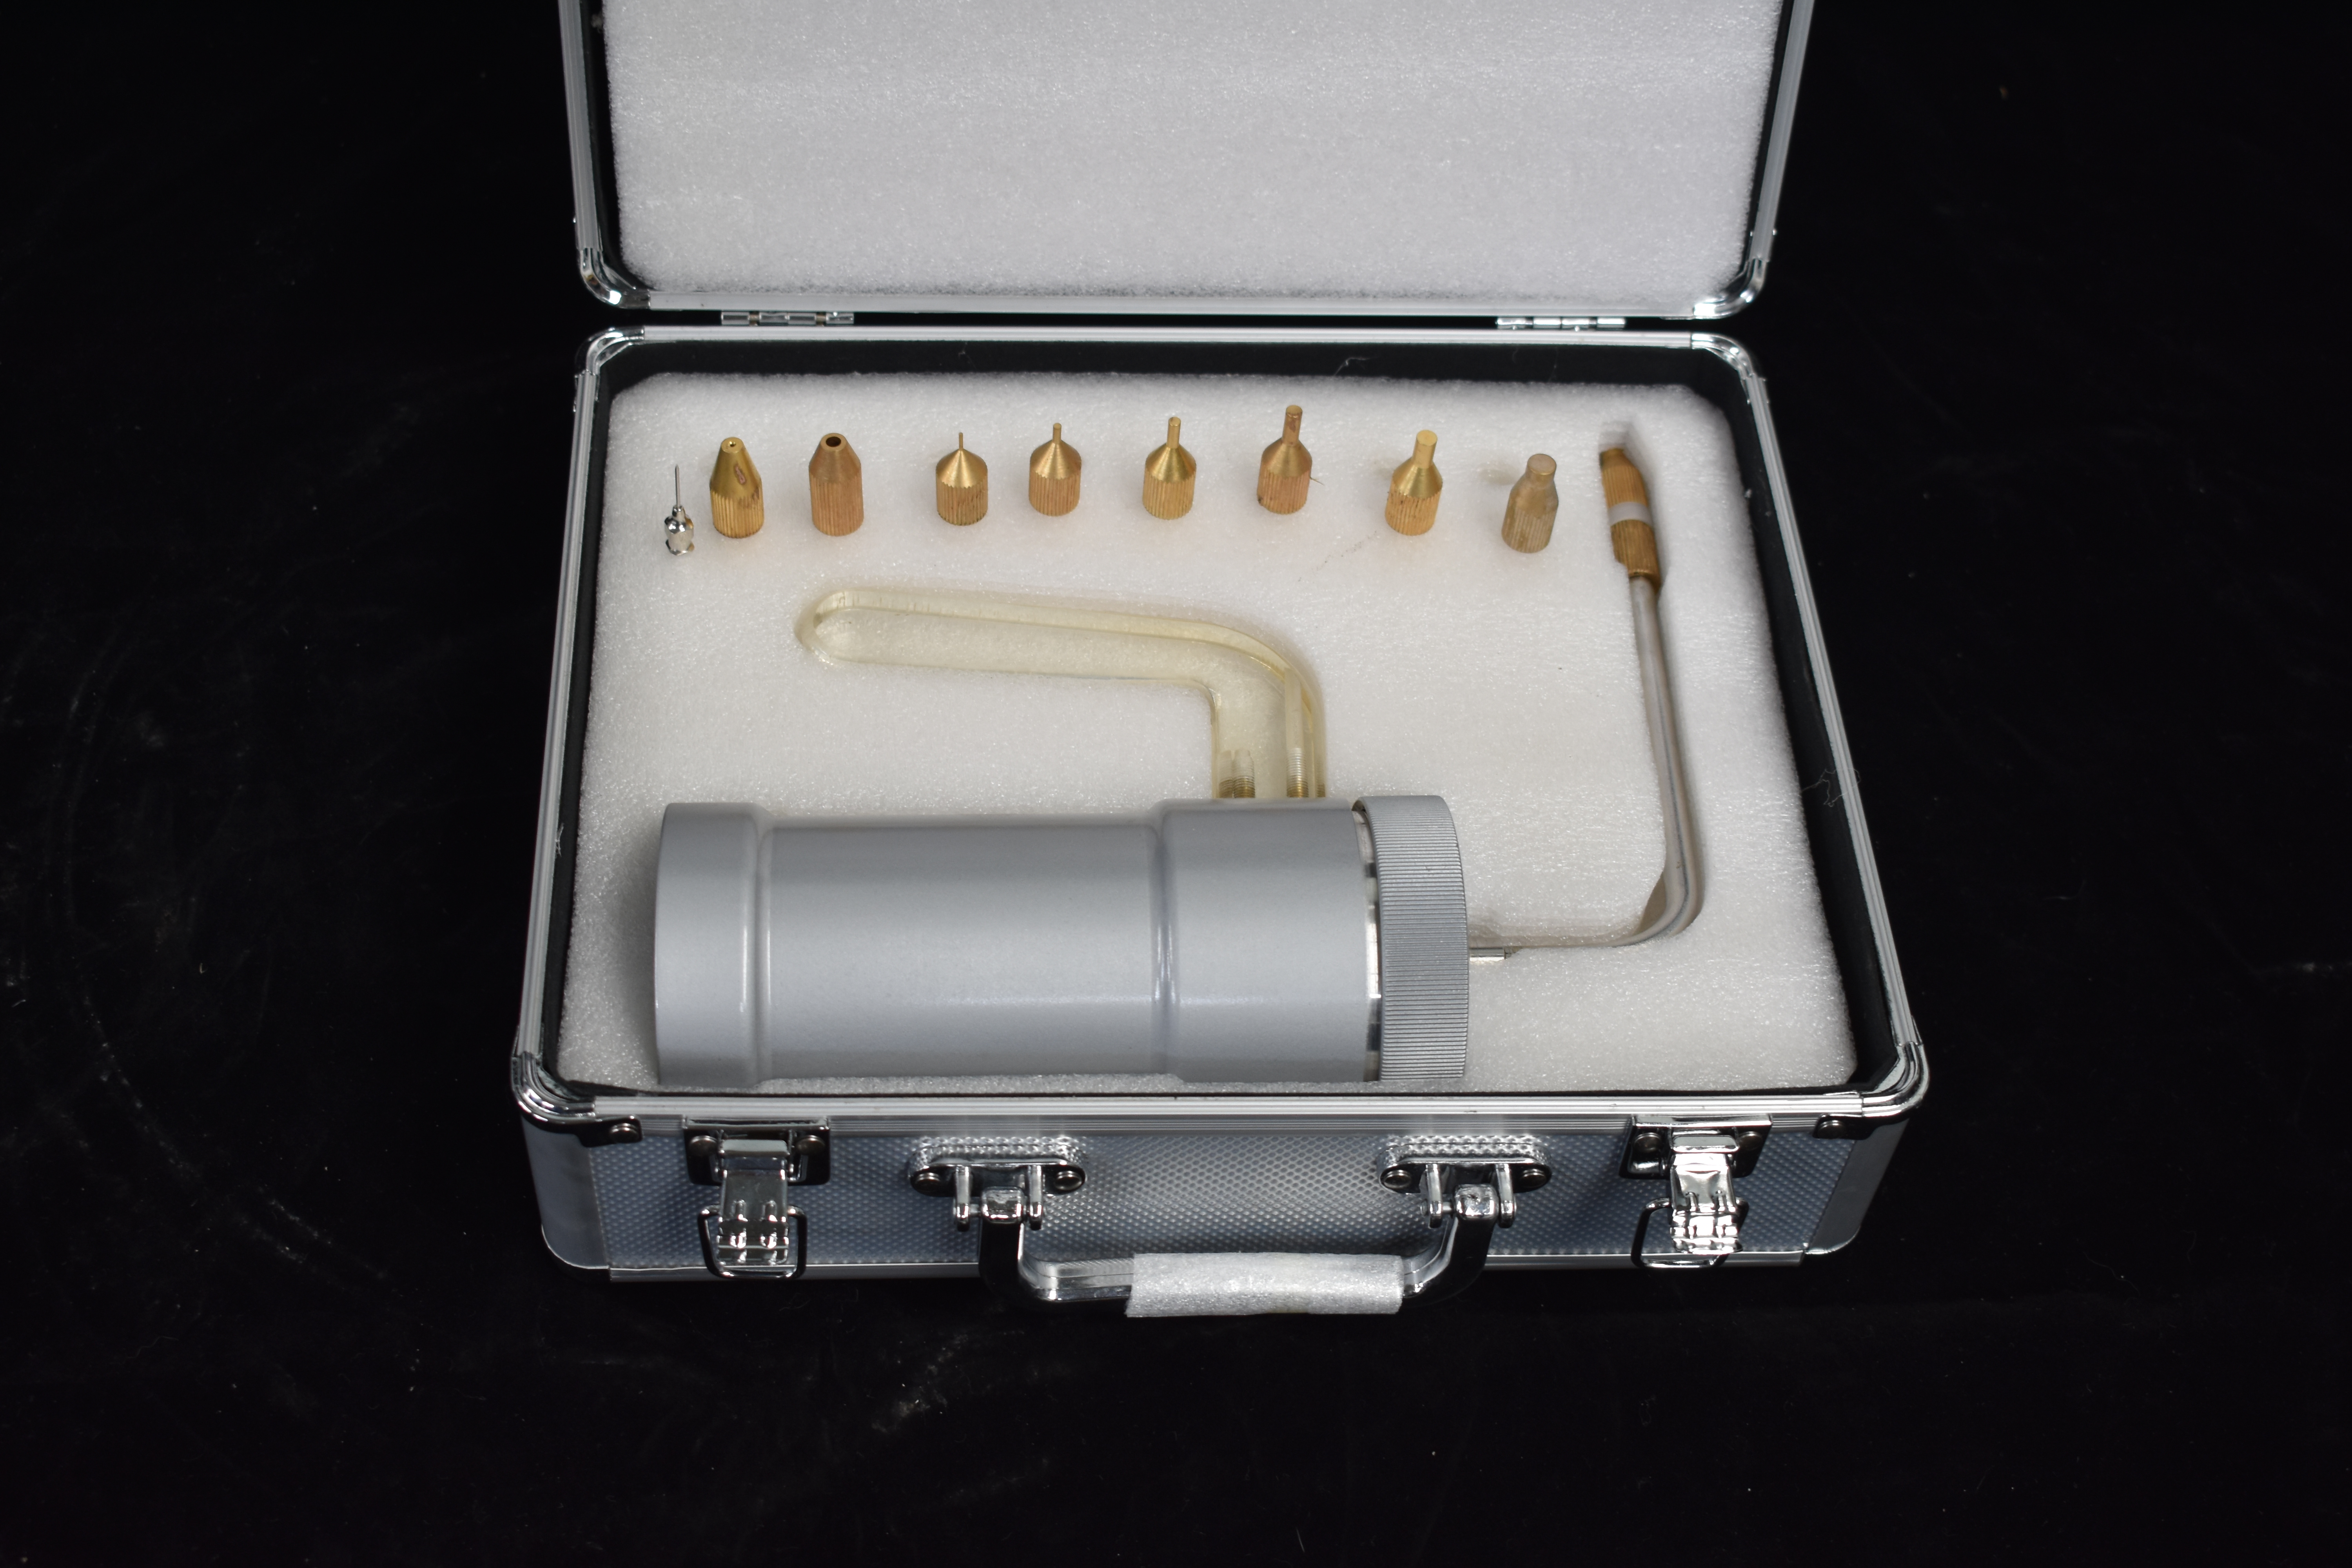 The working principle of the liquid nitrogen gun cryotherapy device